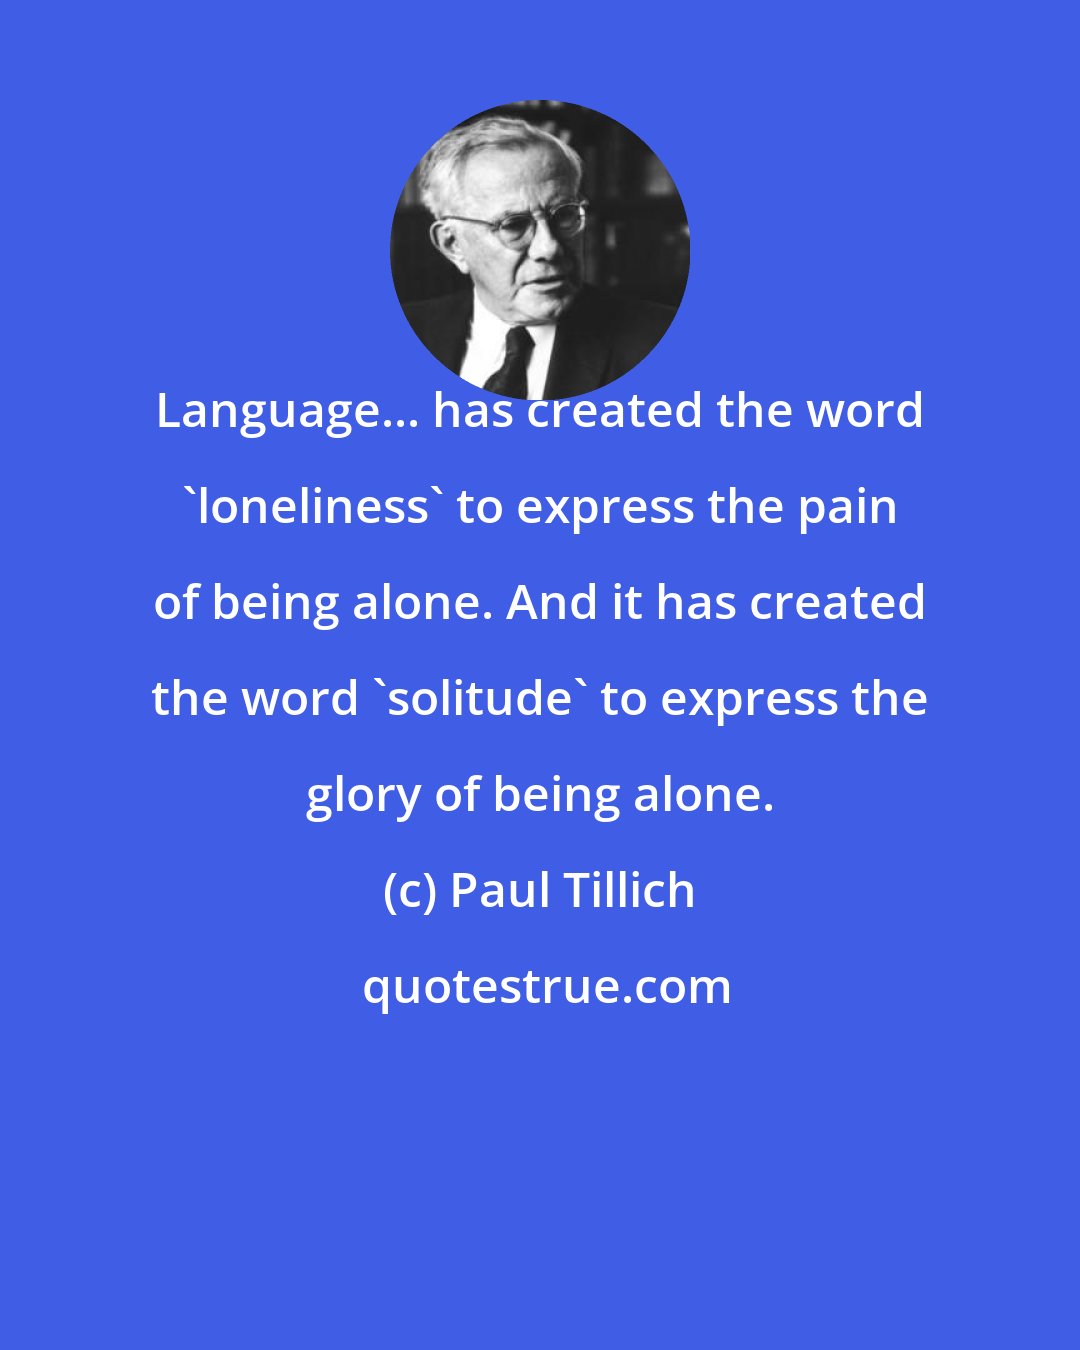 Paul Tillich: Language... has created the word 'loneliness' to express the pain of being alone. And it has created the word 'solitude' to express the glory of being alone.